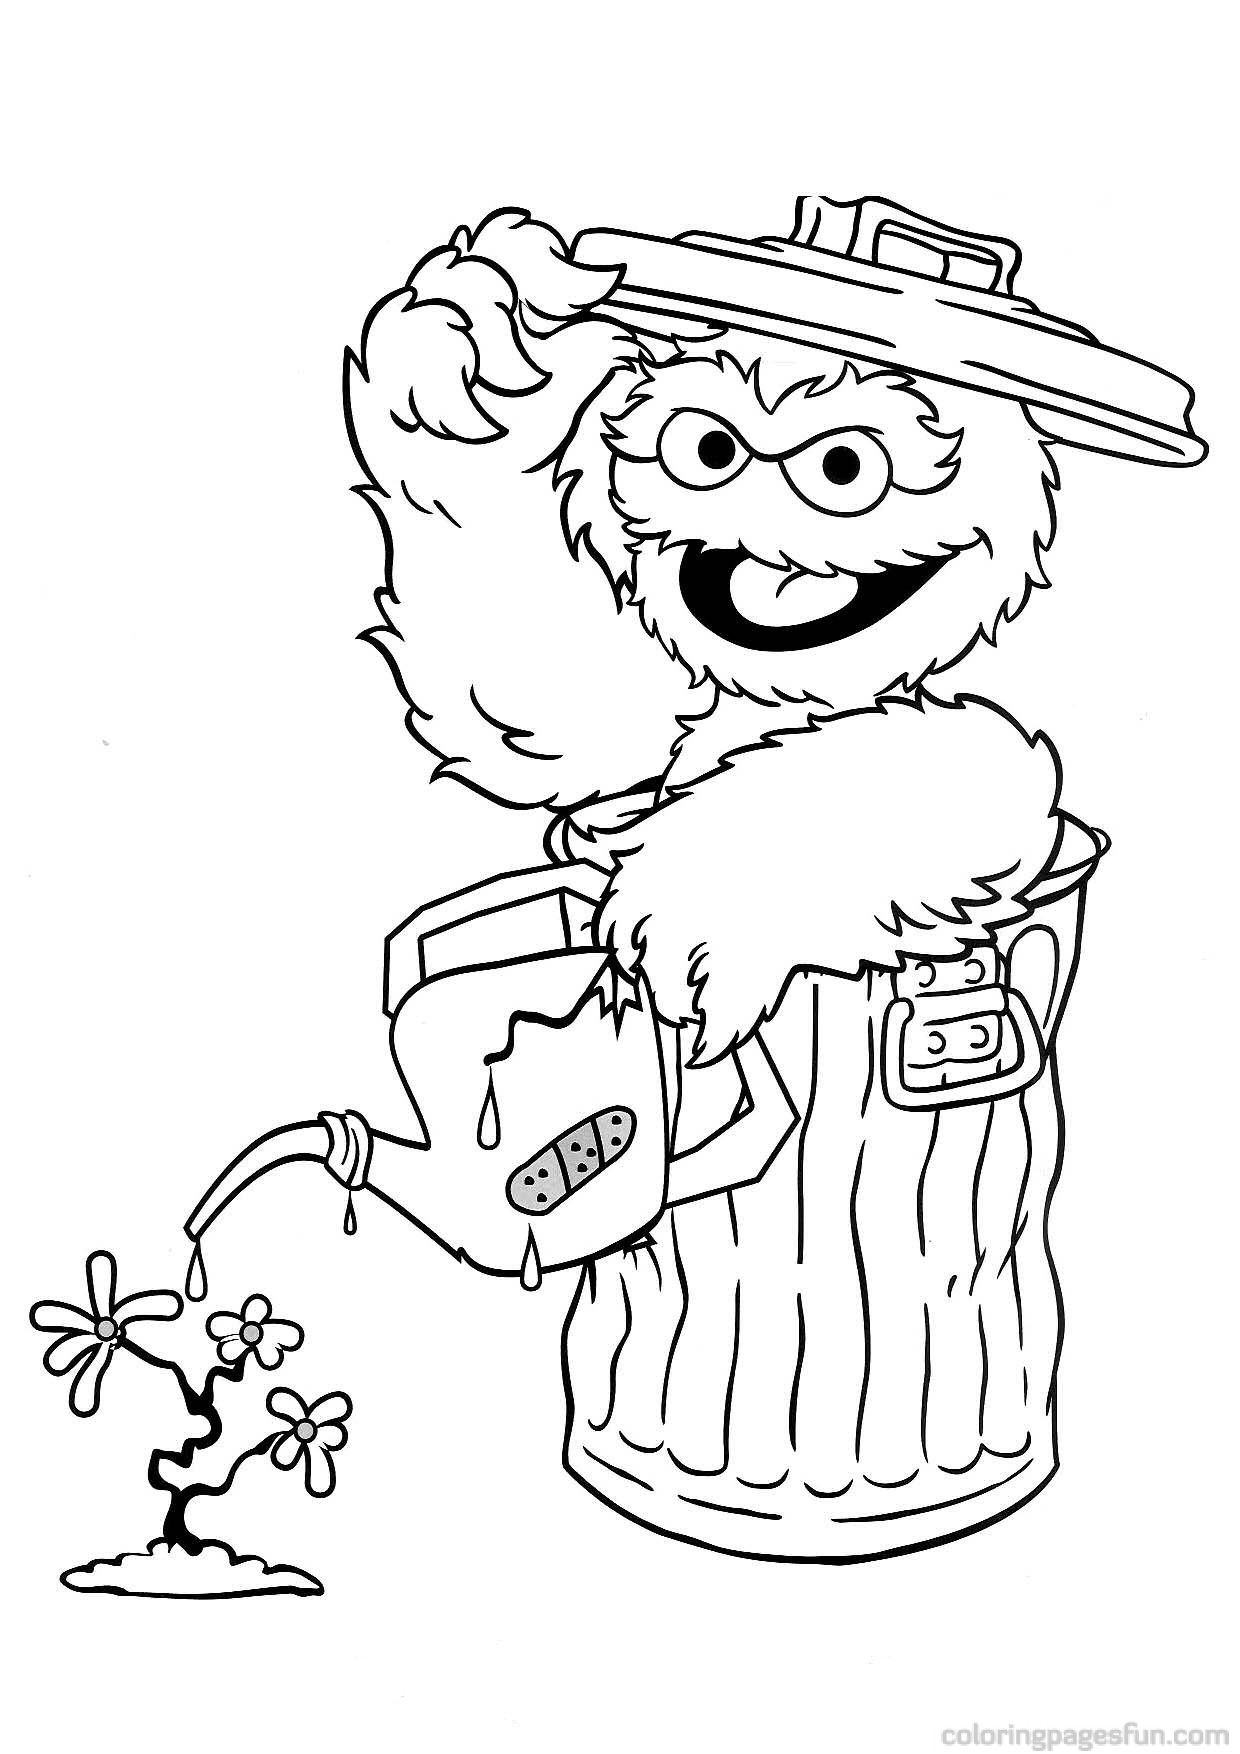 72 Oscar the Grouch Coloring Pages Printable 20